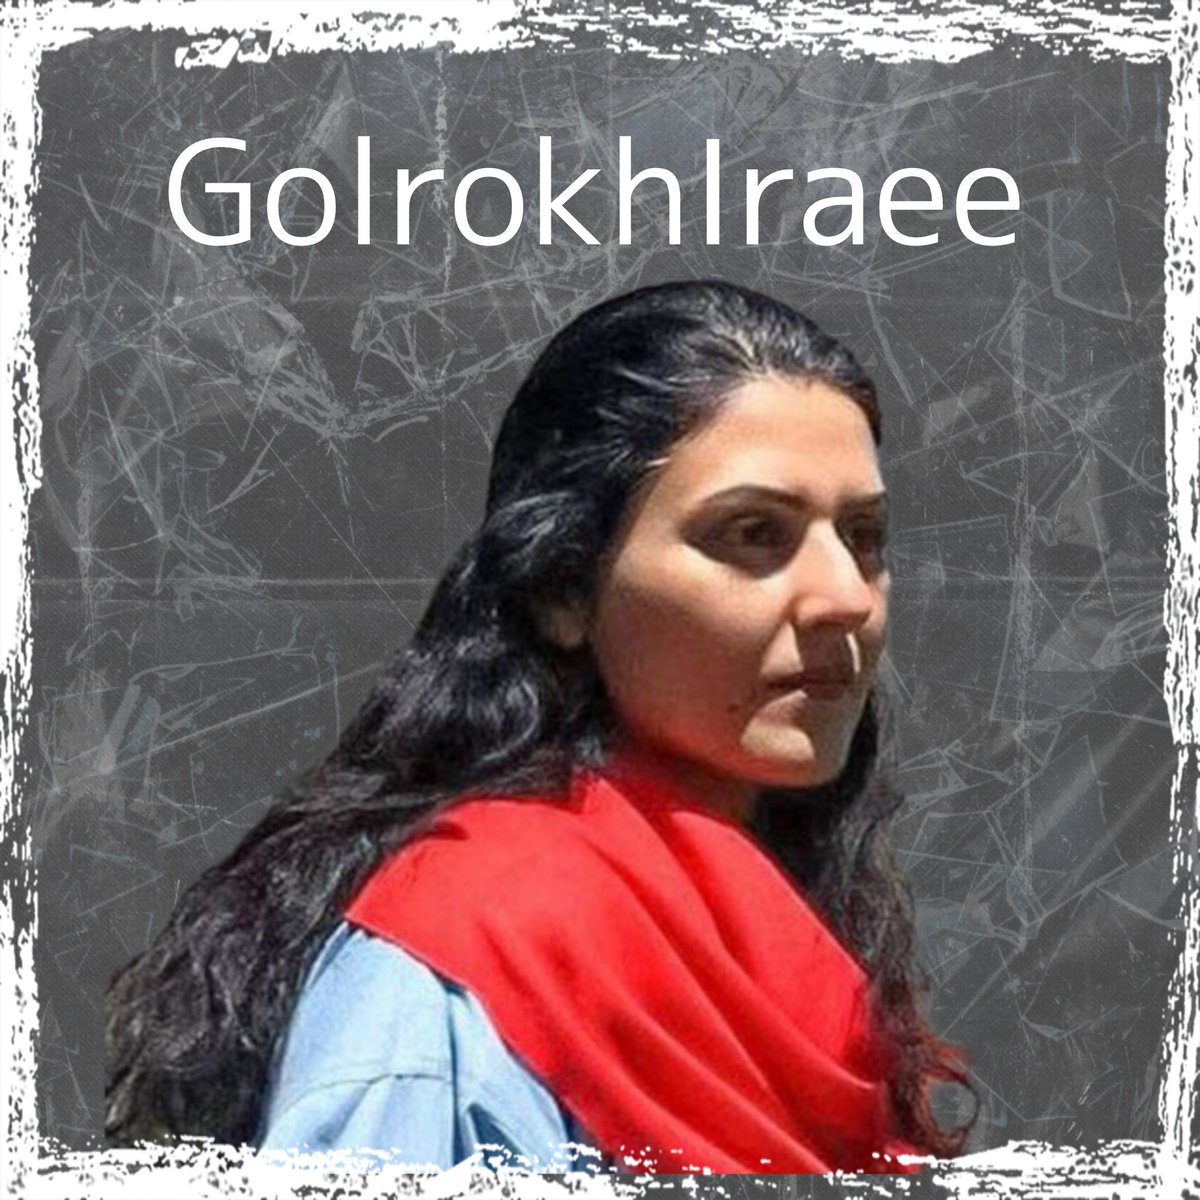 #FreeGolrokh The Revolutionary Court sentenced human rights advocate and former political prisoner #GolrokhIraee to 7 years imprisonment. This act is unjust and a crime against our common humanity @JavaidRehman @volker_turk